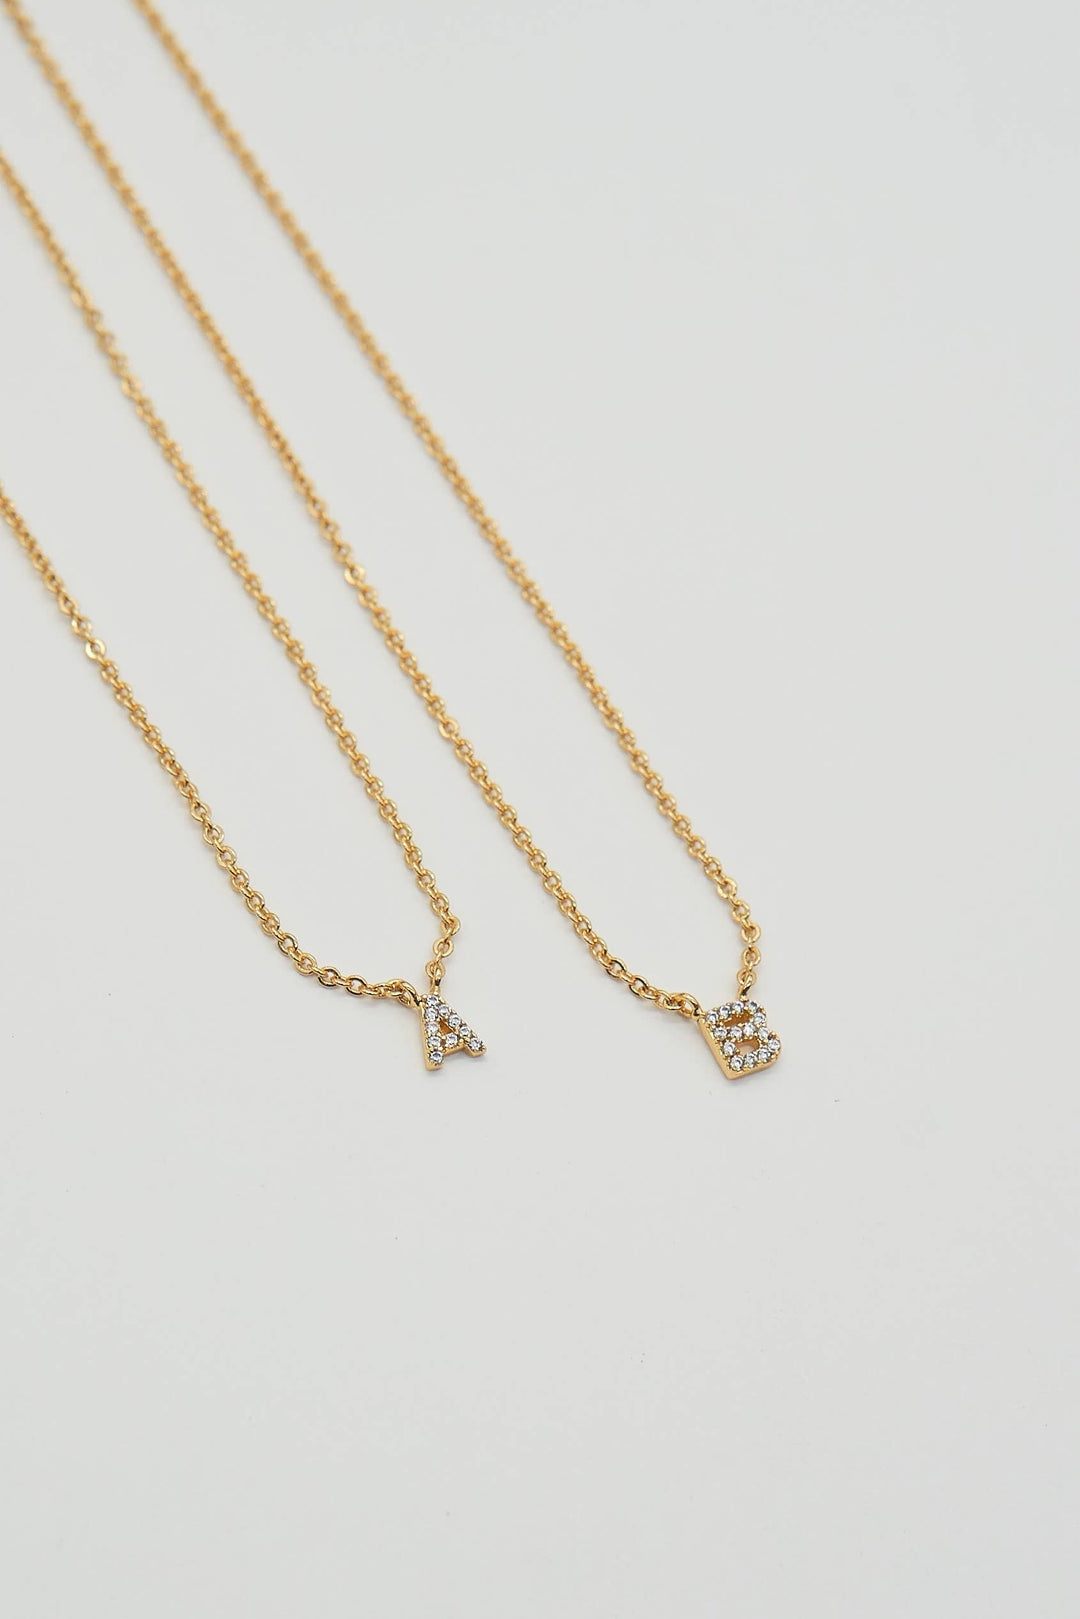 Shiny Initial Necklace: Holiday Favorite!: S